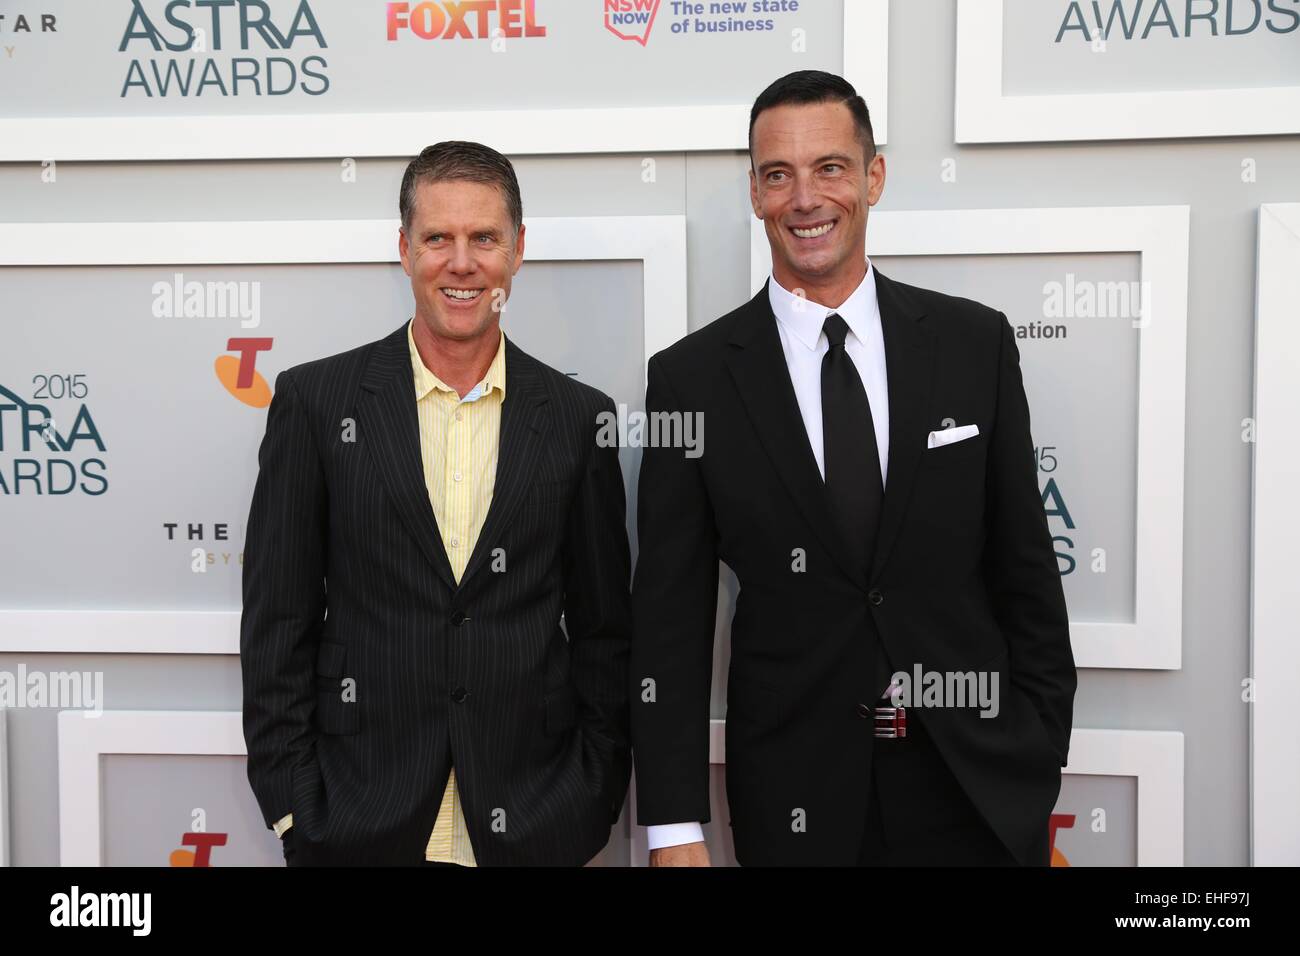 Sydney, Australia. 12 March 2015. The ASTRA Awards recognise the best in subscription television. Celebrities arrived on the red carpet at The Star in Sydney, Australia. Credit:  Richard Milnes/Alamy Live News Stock Photo